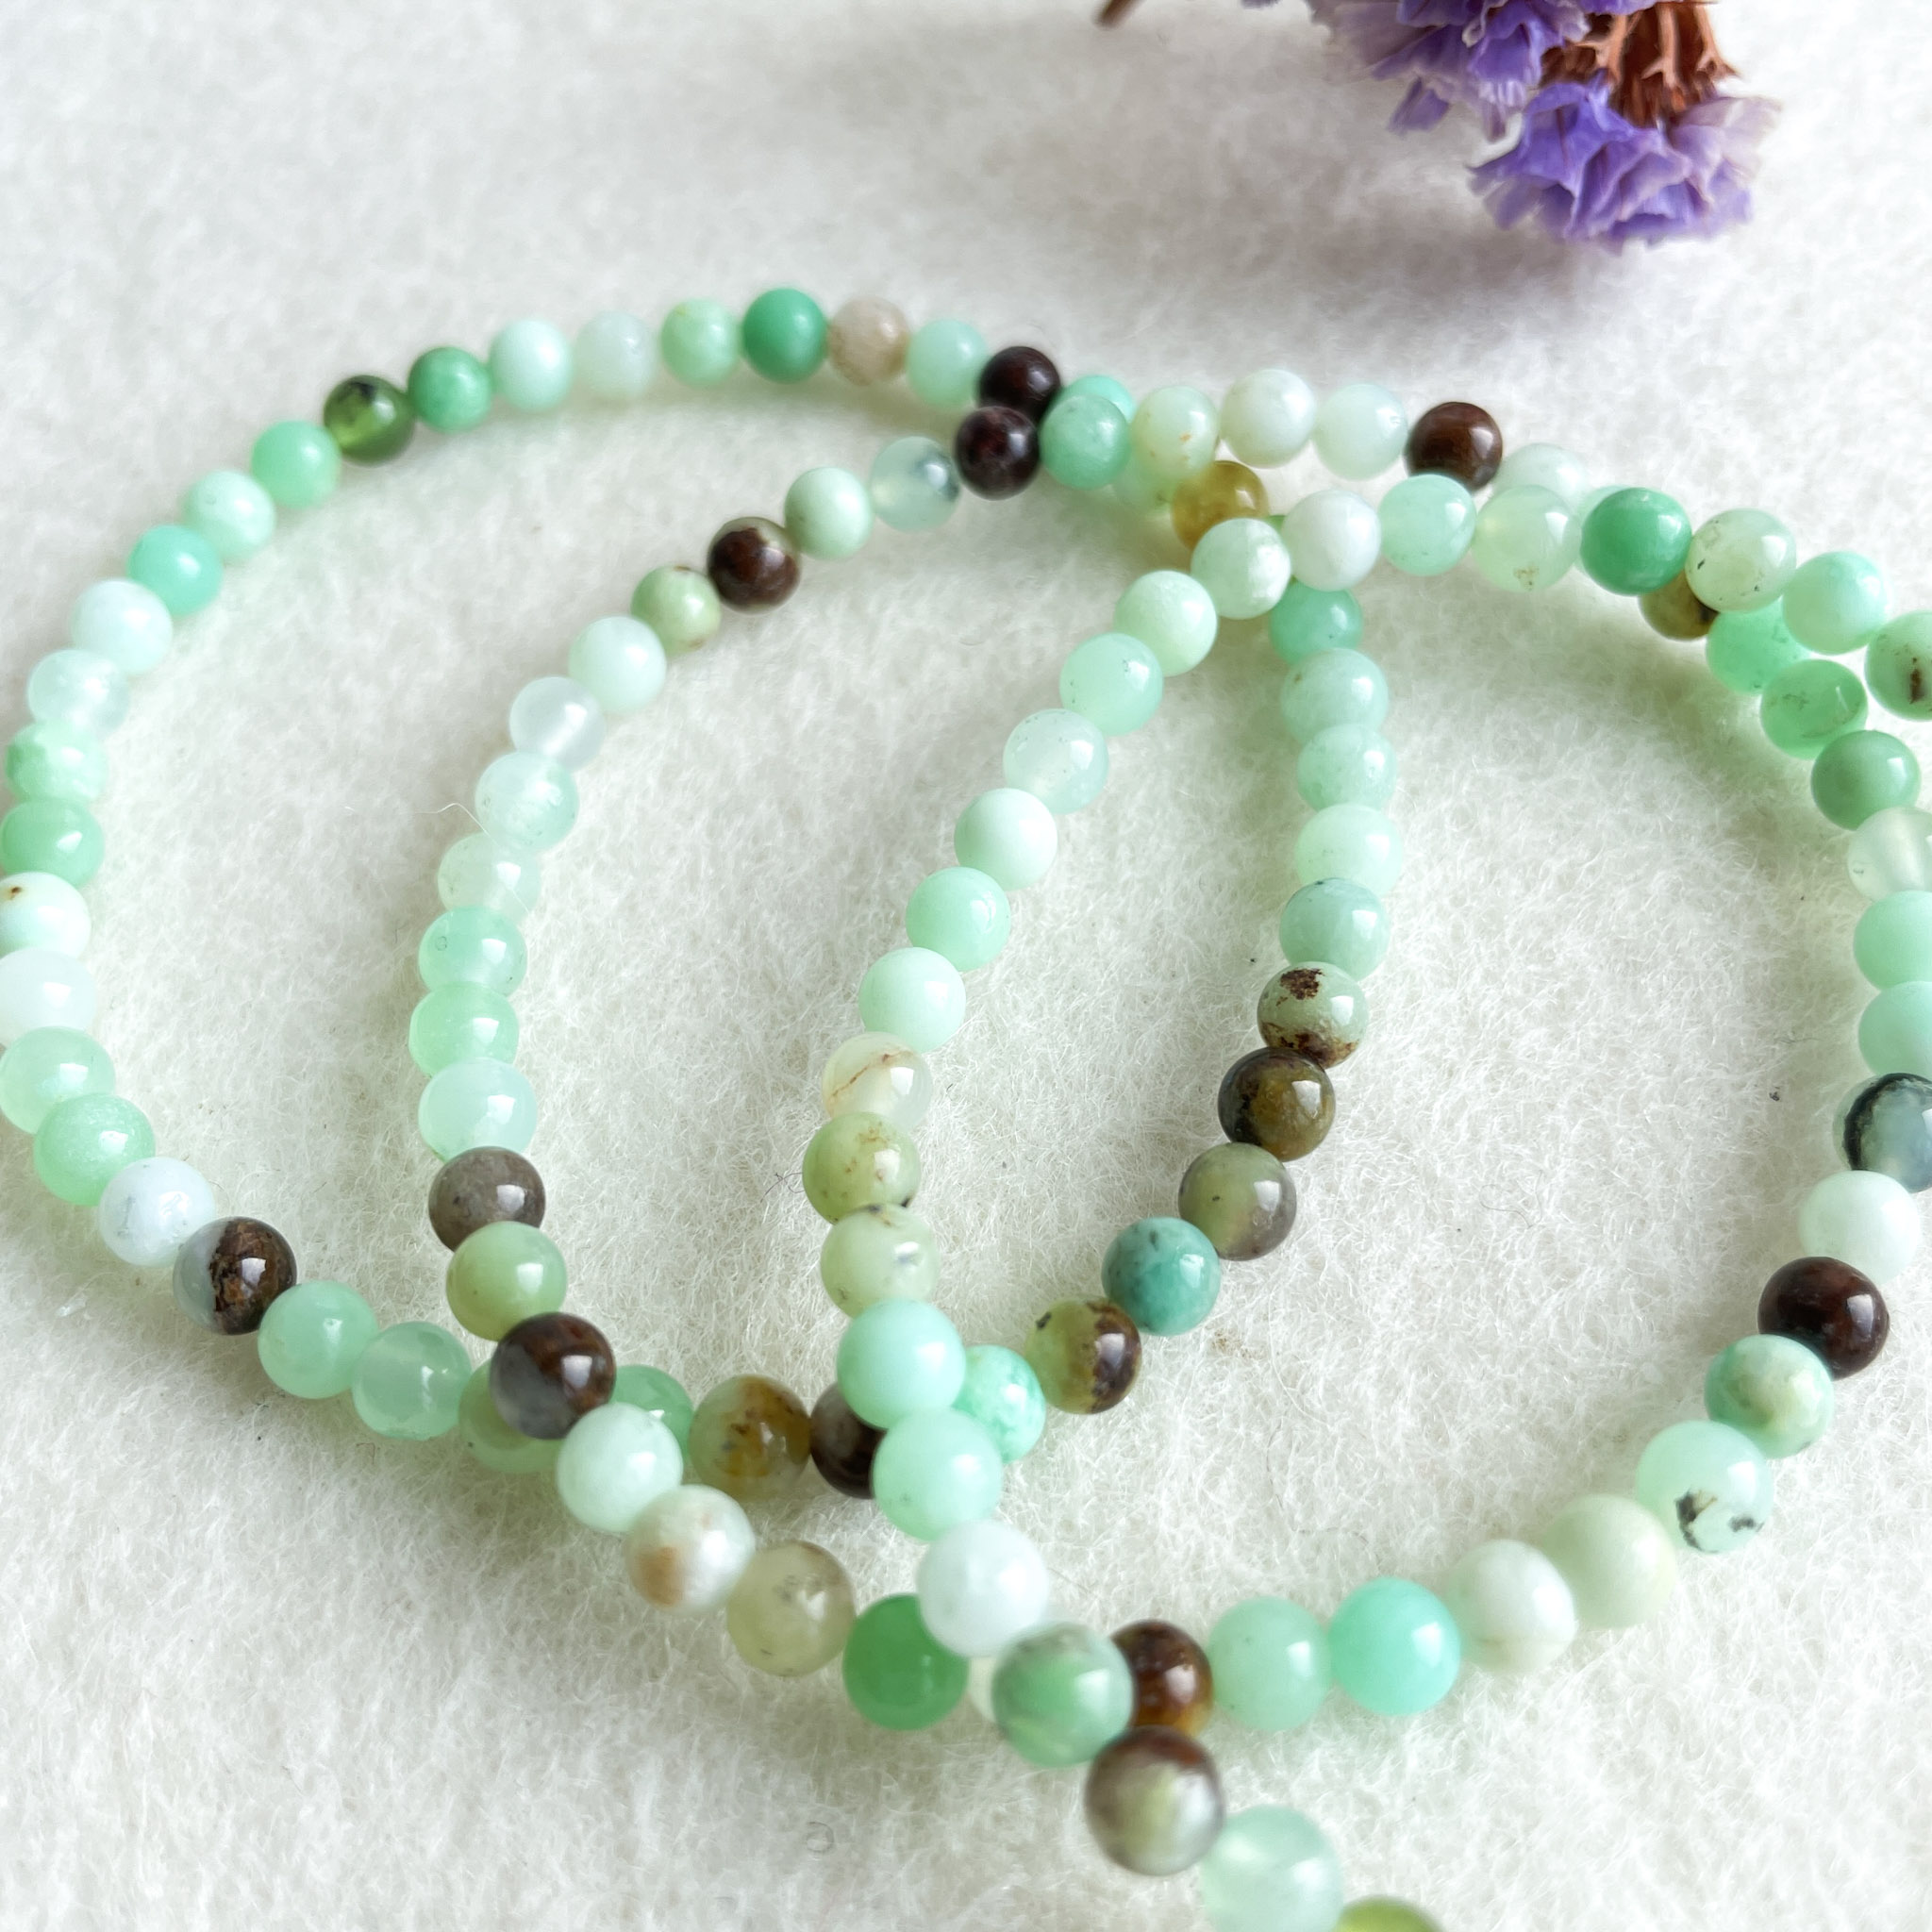 A set of two beaded necklaces with varying shades of green beads, some of which are translucent, interspersed with occasional brown beads, laid out on a white fibrous background next to a small purple flower.